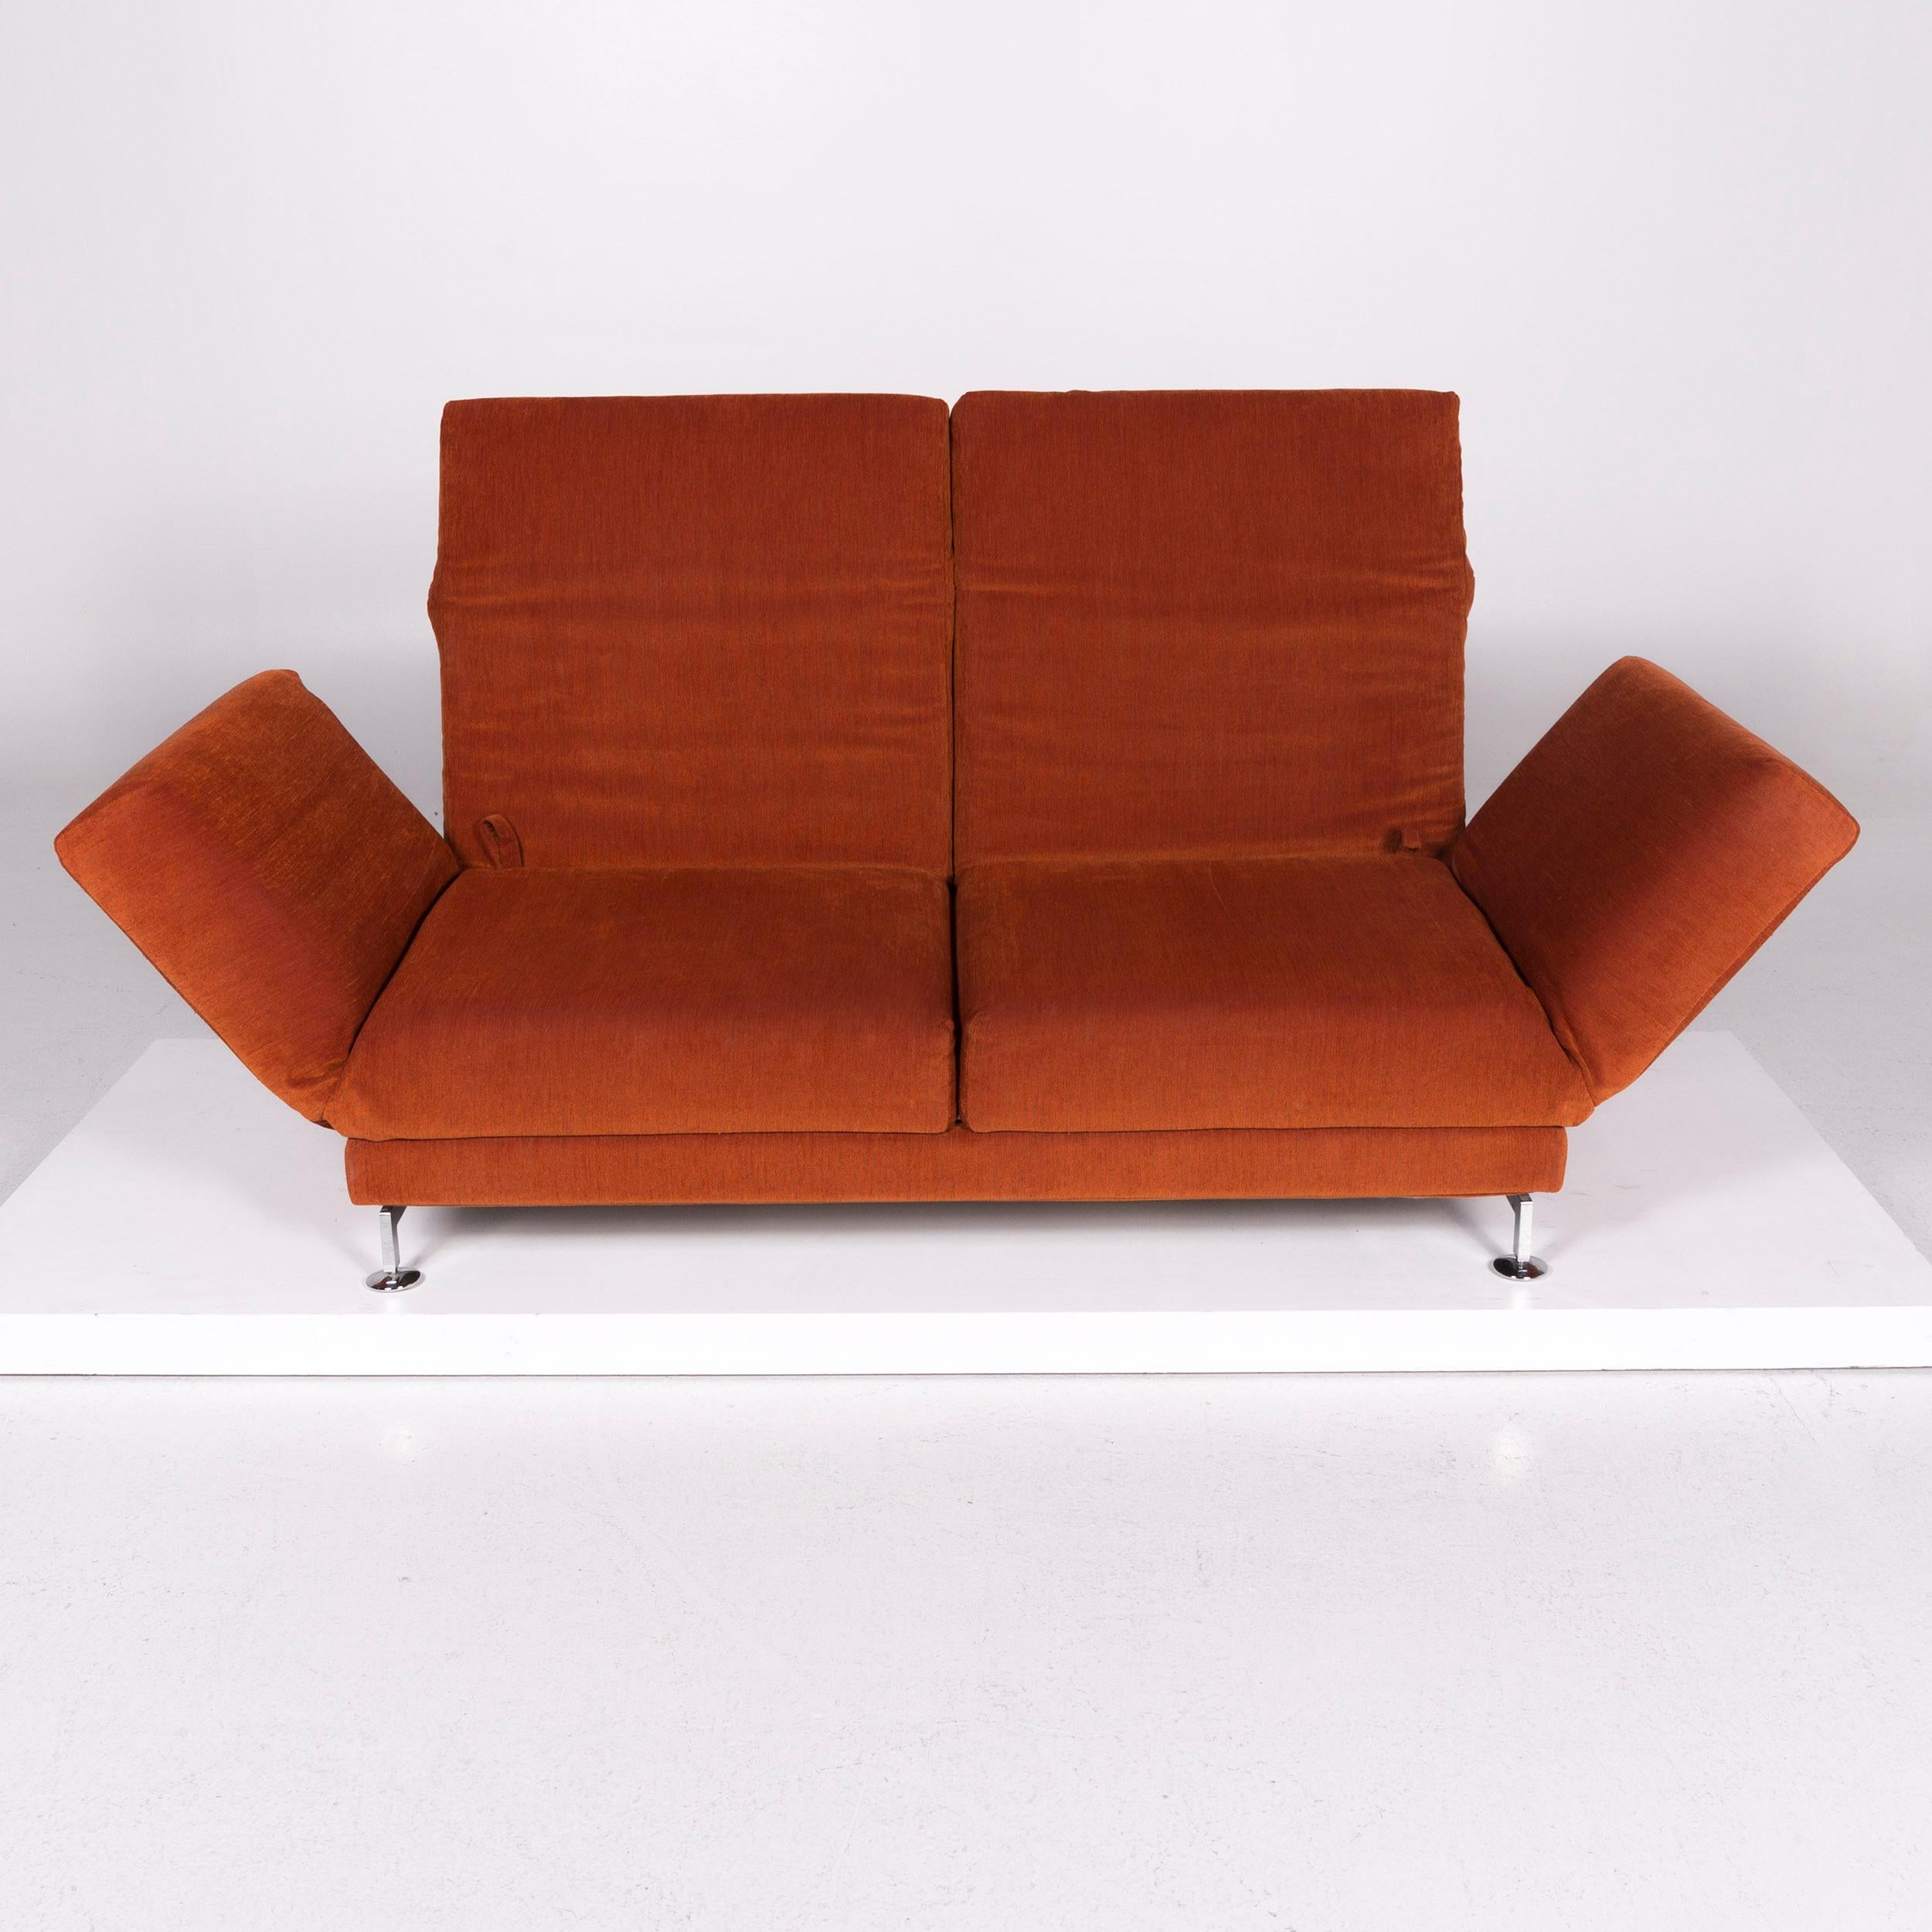 Contemporary Brühl & Sippold Moule Fabric Sofa Orange Two-Seat Incl. Function